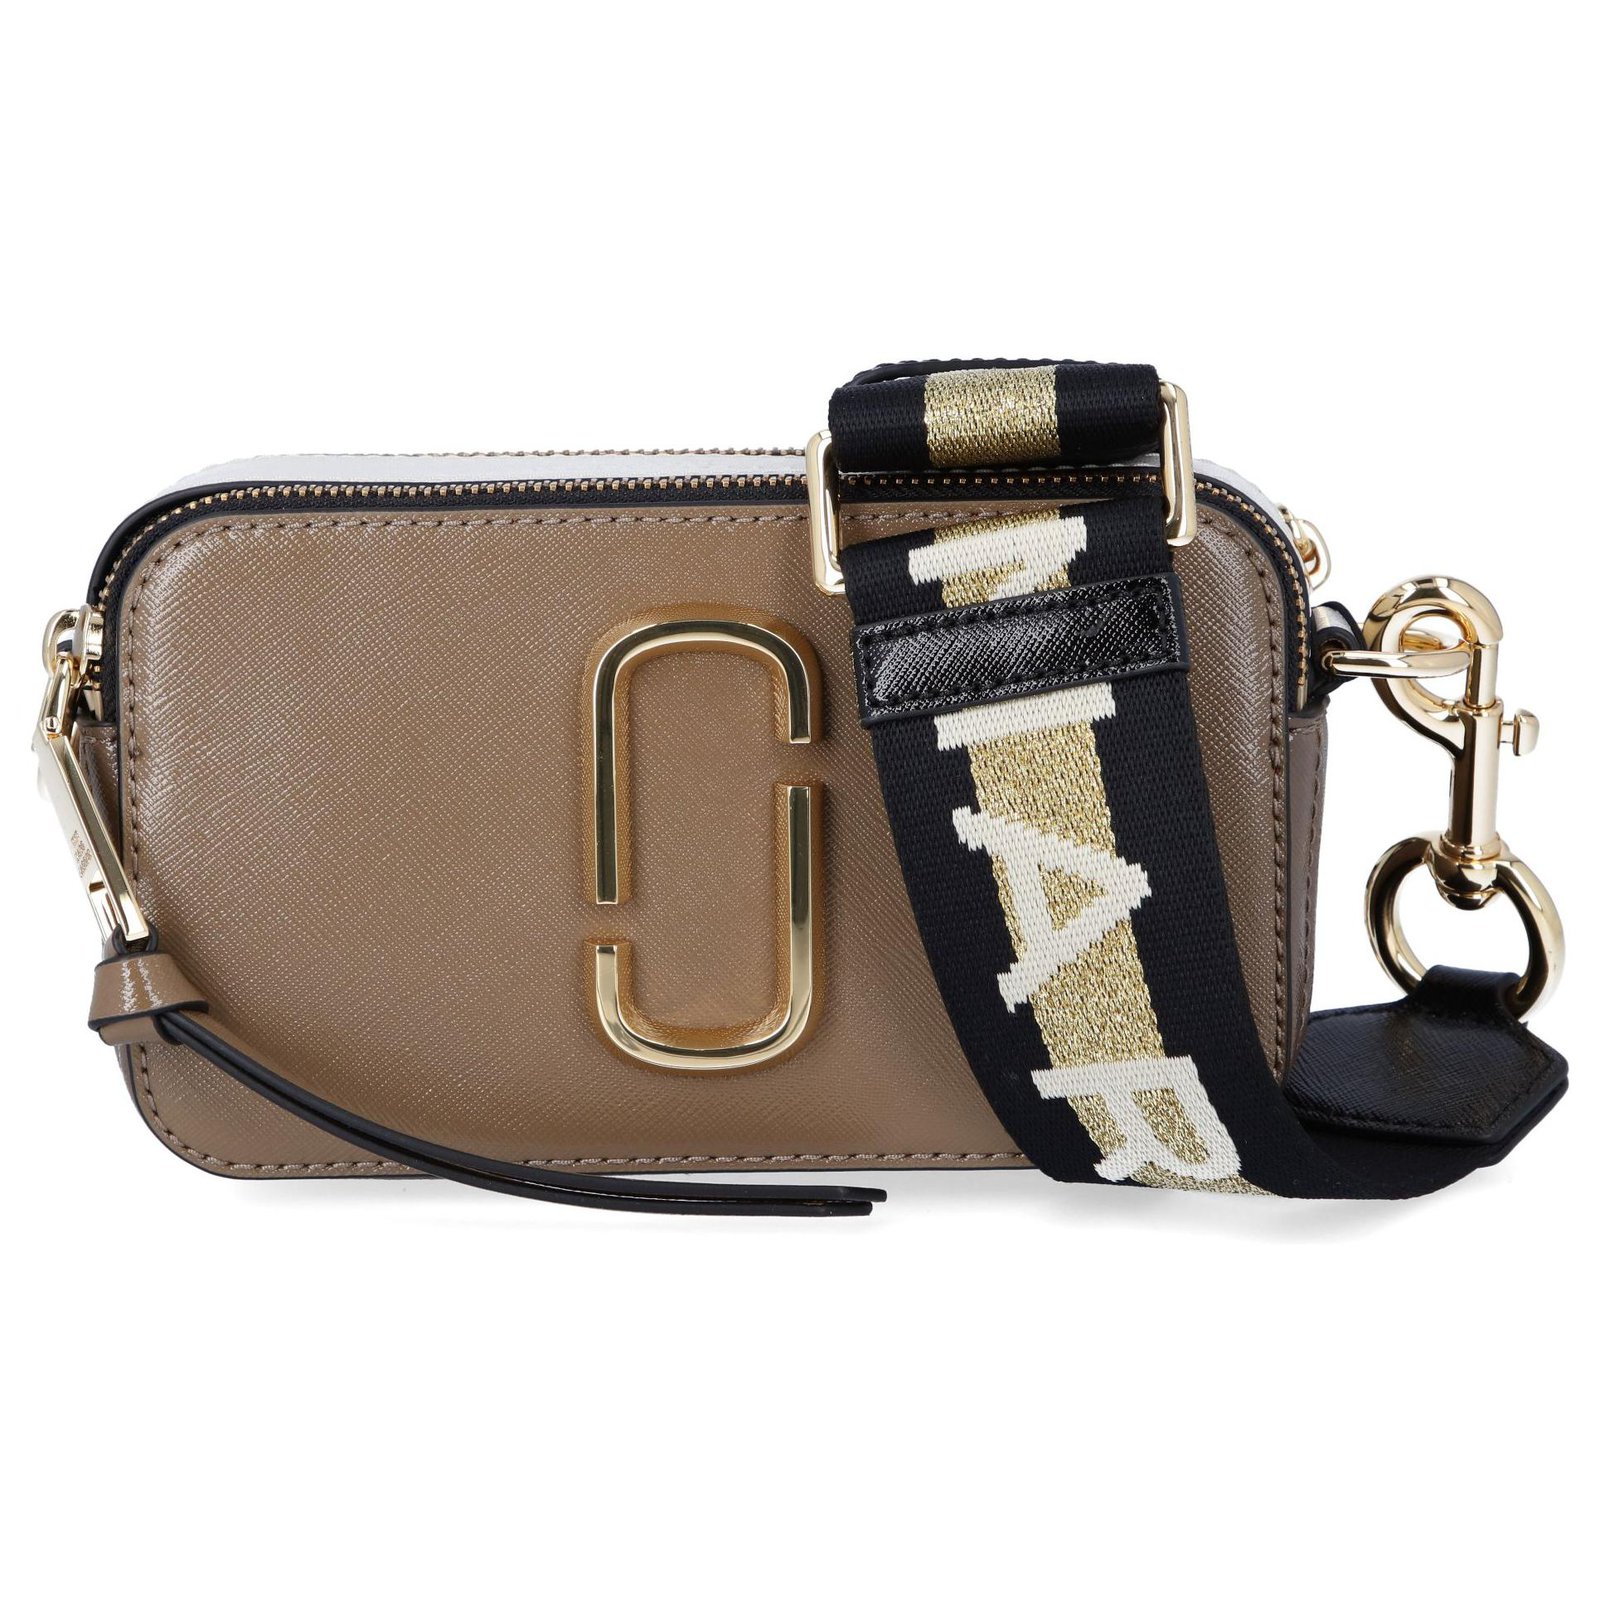 Marc Jacobs Snapshot Bag In Khaki Color Leather in Natural